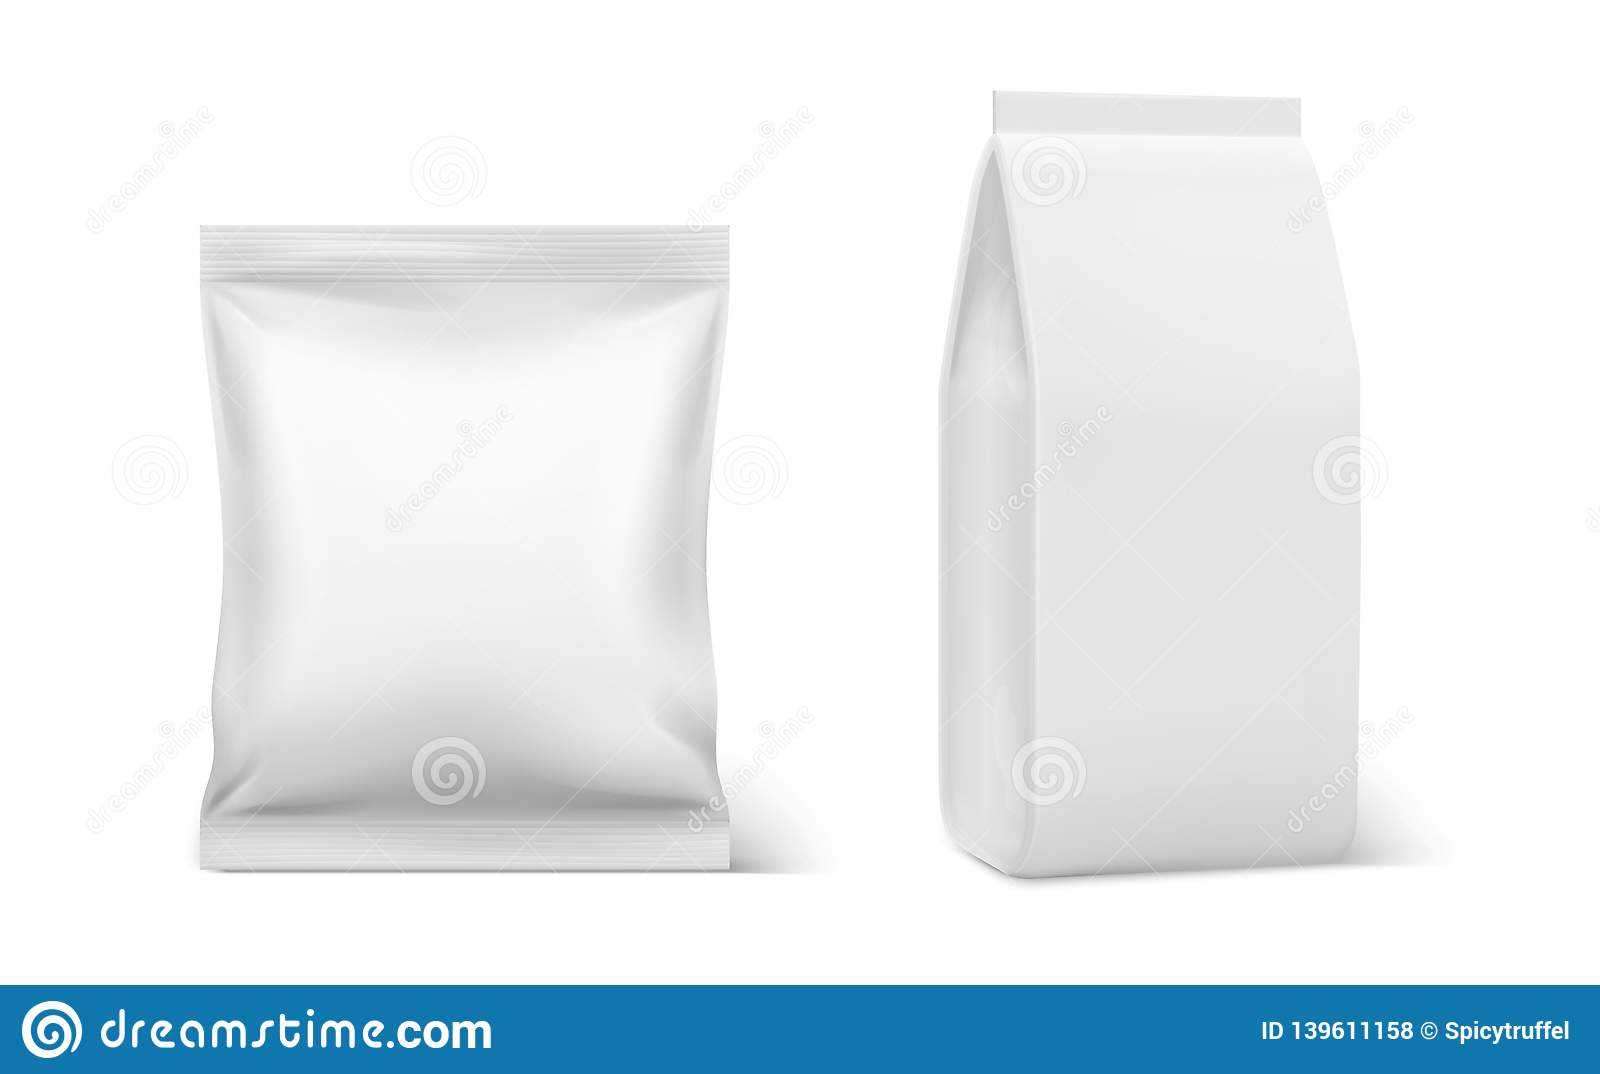 Realistic Pillow Pack. Coffee Doy Blank Mockup, Plastic Pertaining To Blank Packaging Templates